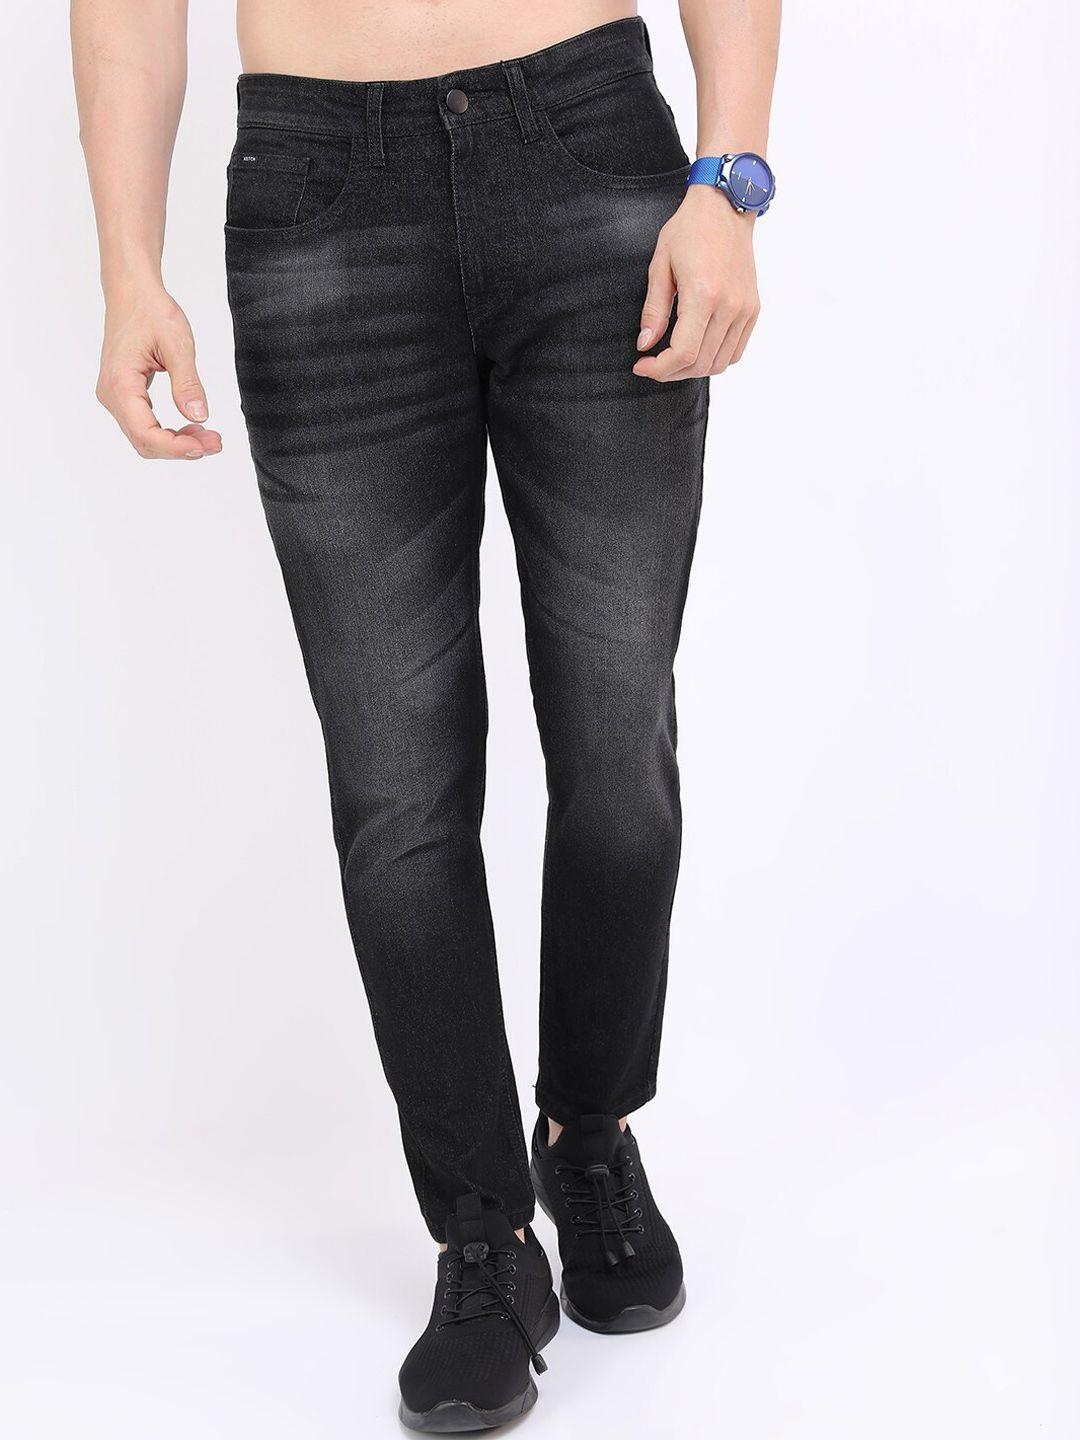 ketch-men-charcoal-tapered-fit-light-fade-cotton-stretchable-jeans